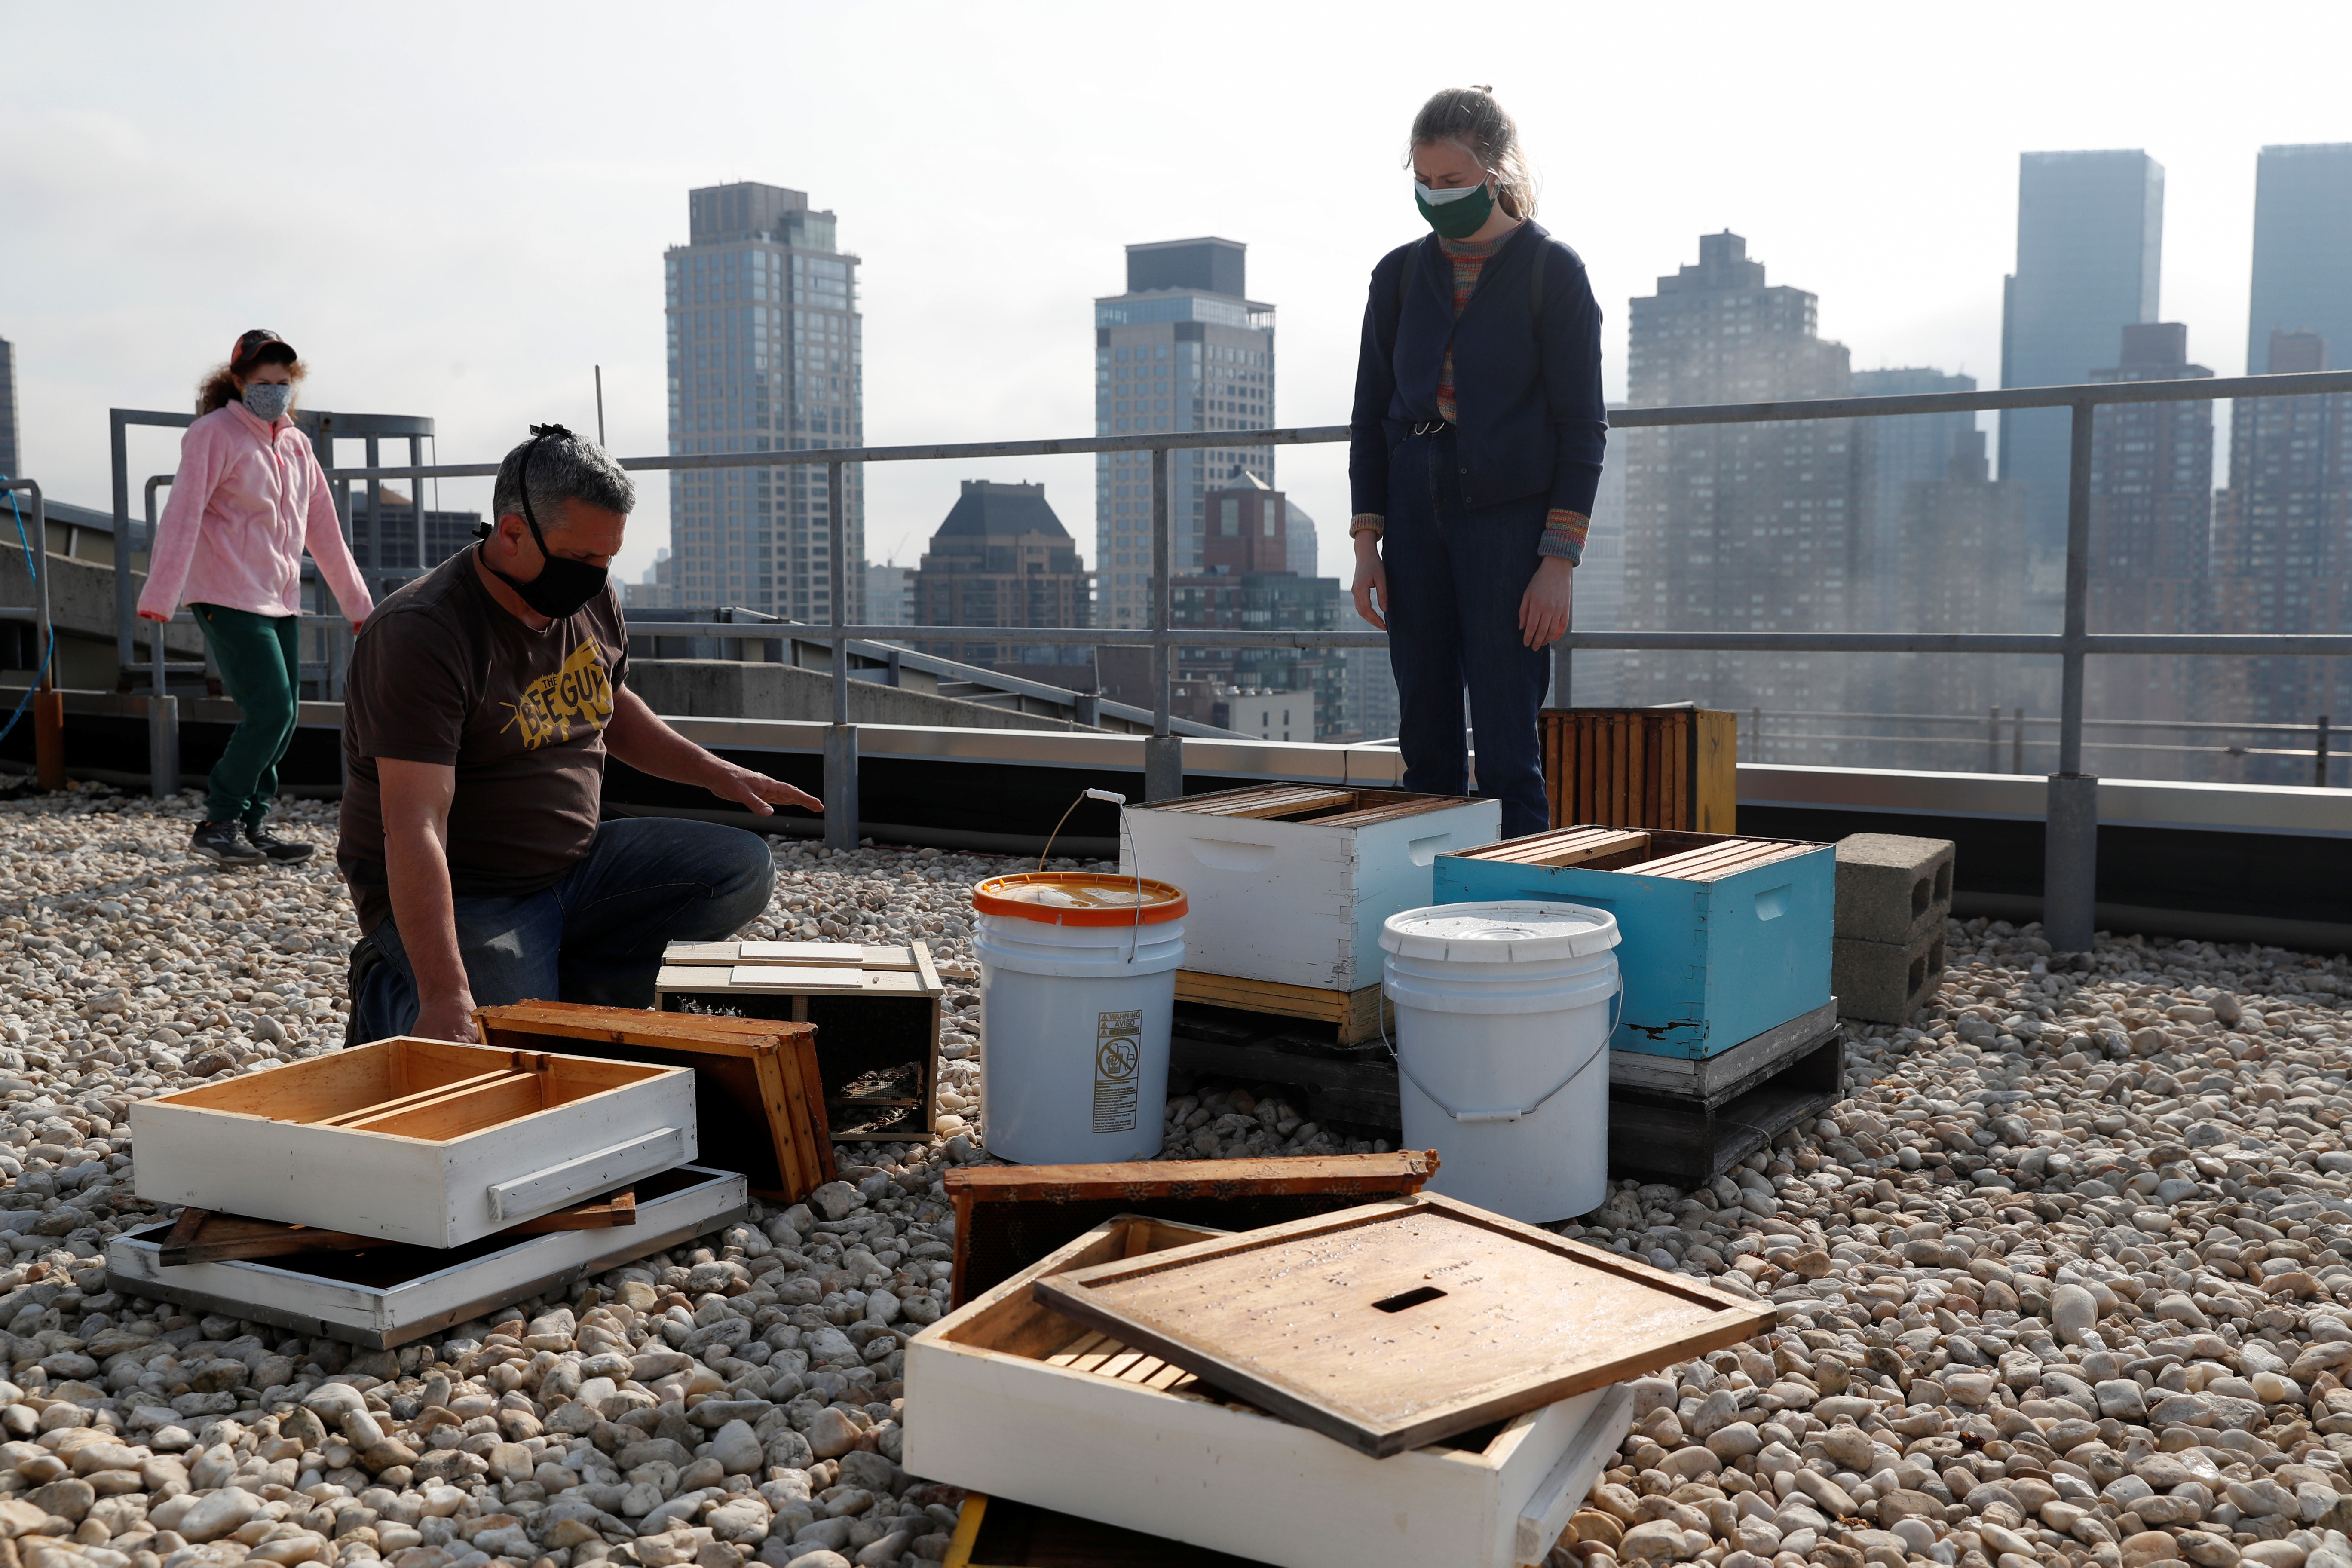 Urban beekeeper Andrew Cote replenishes bee hives on a rooftop building in New York City